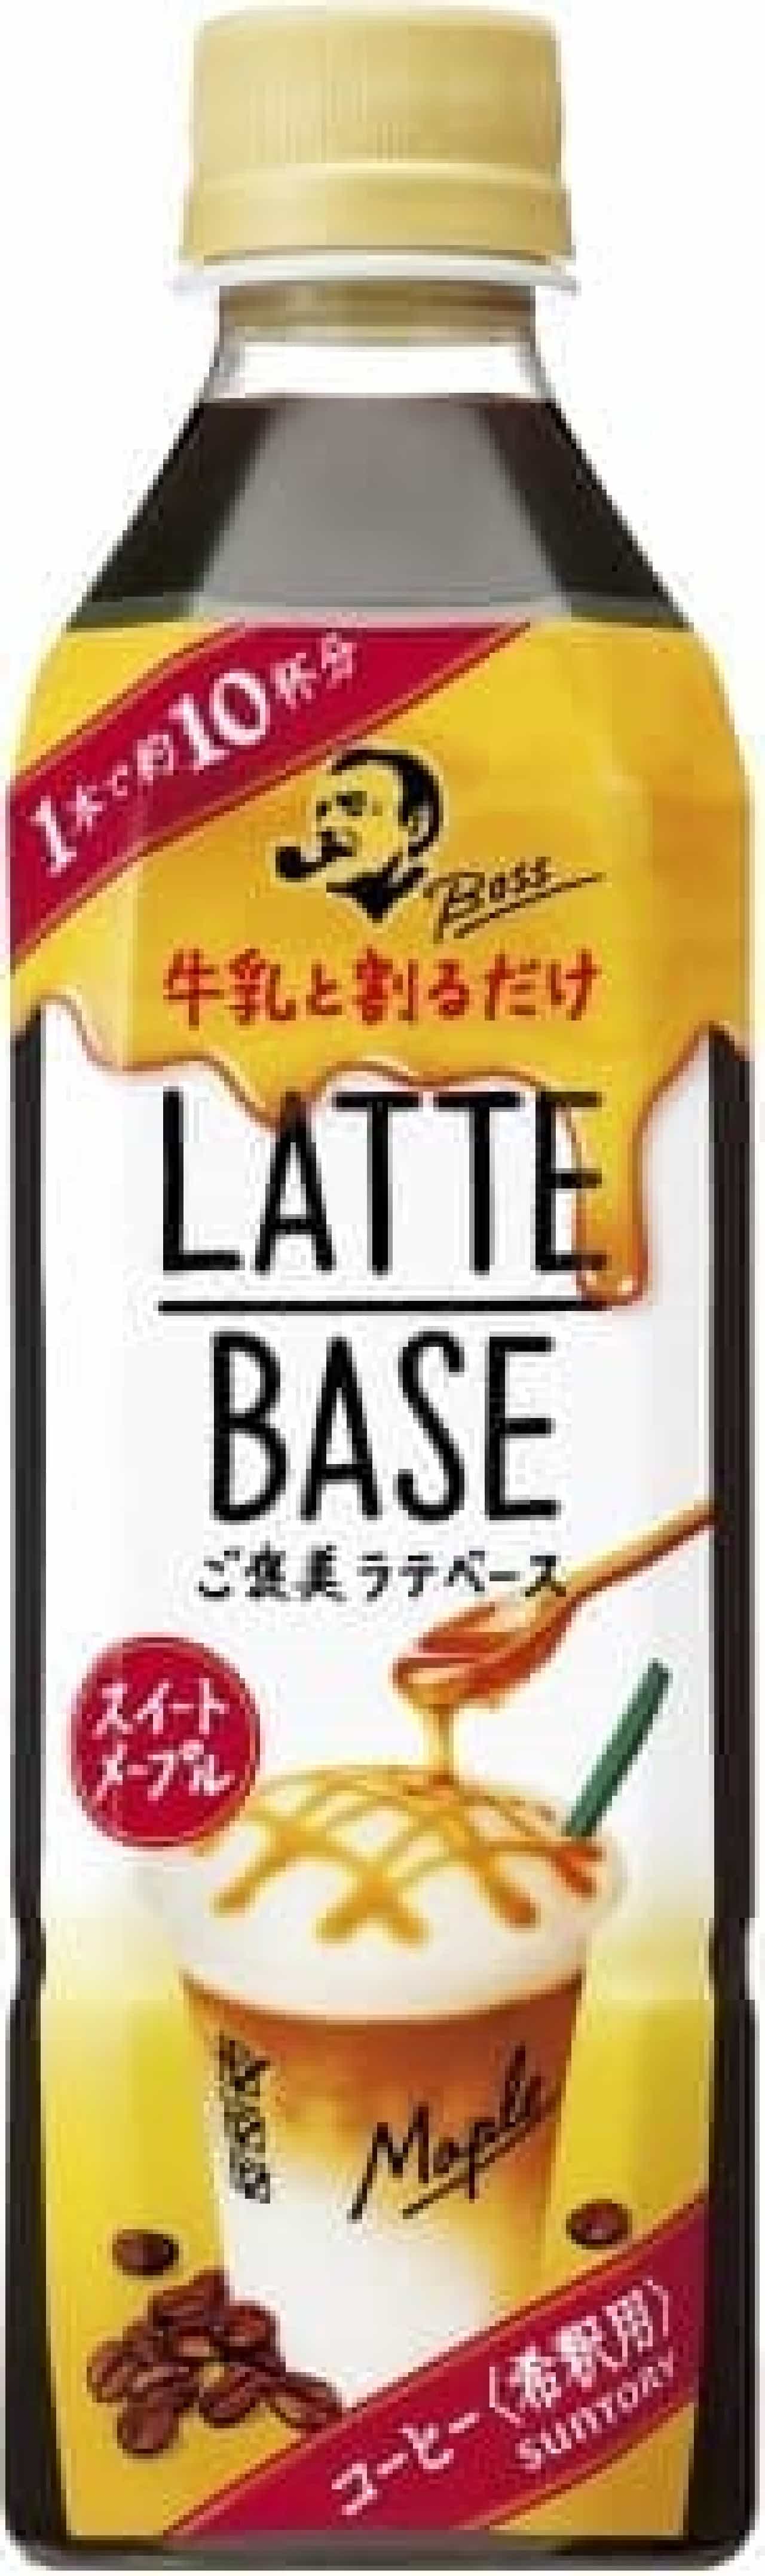 "Boss Latte Base Sweet Maple" jointly developed by Suntory and Calbee